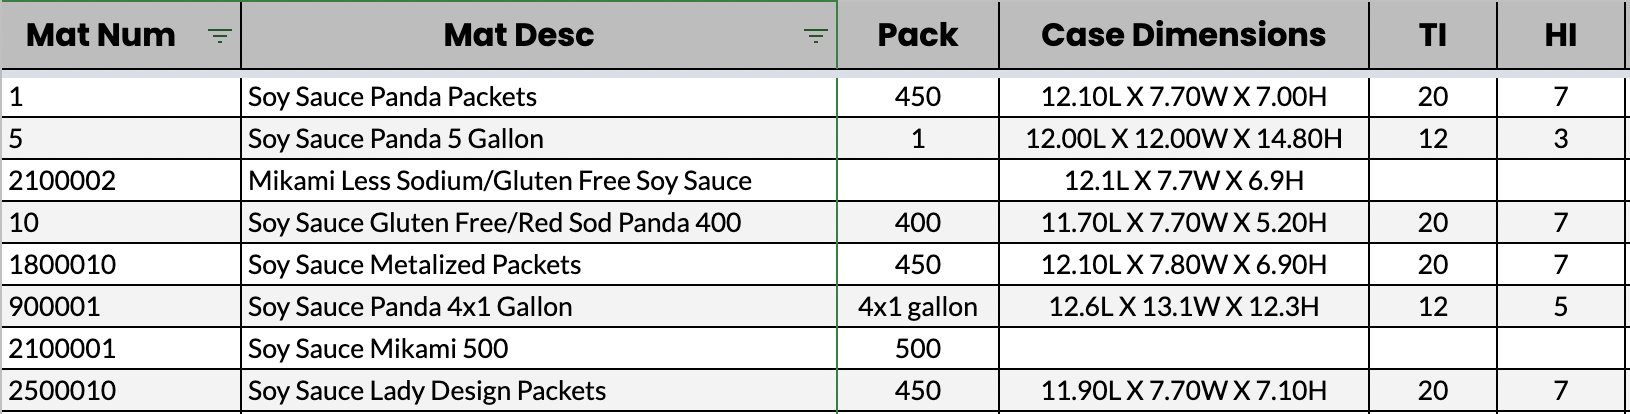 specs for Soy Sauce